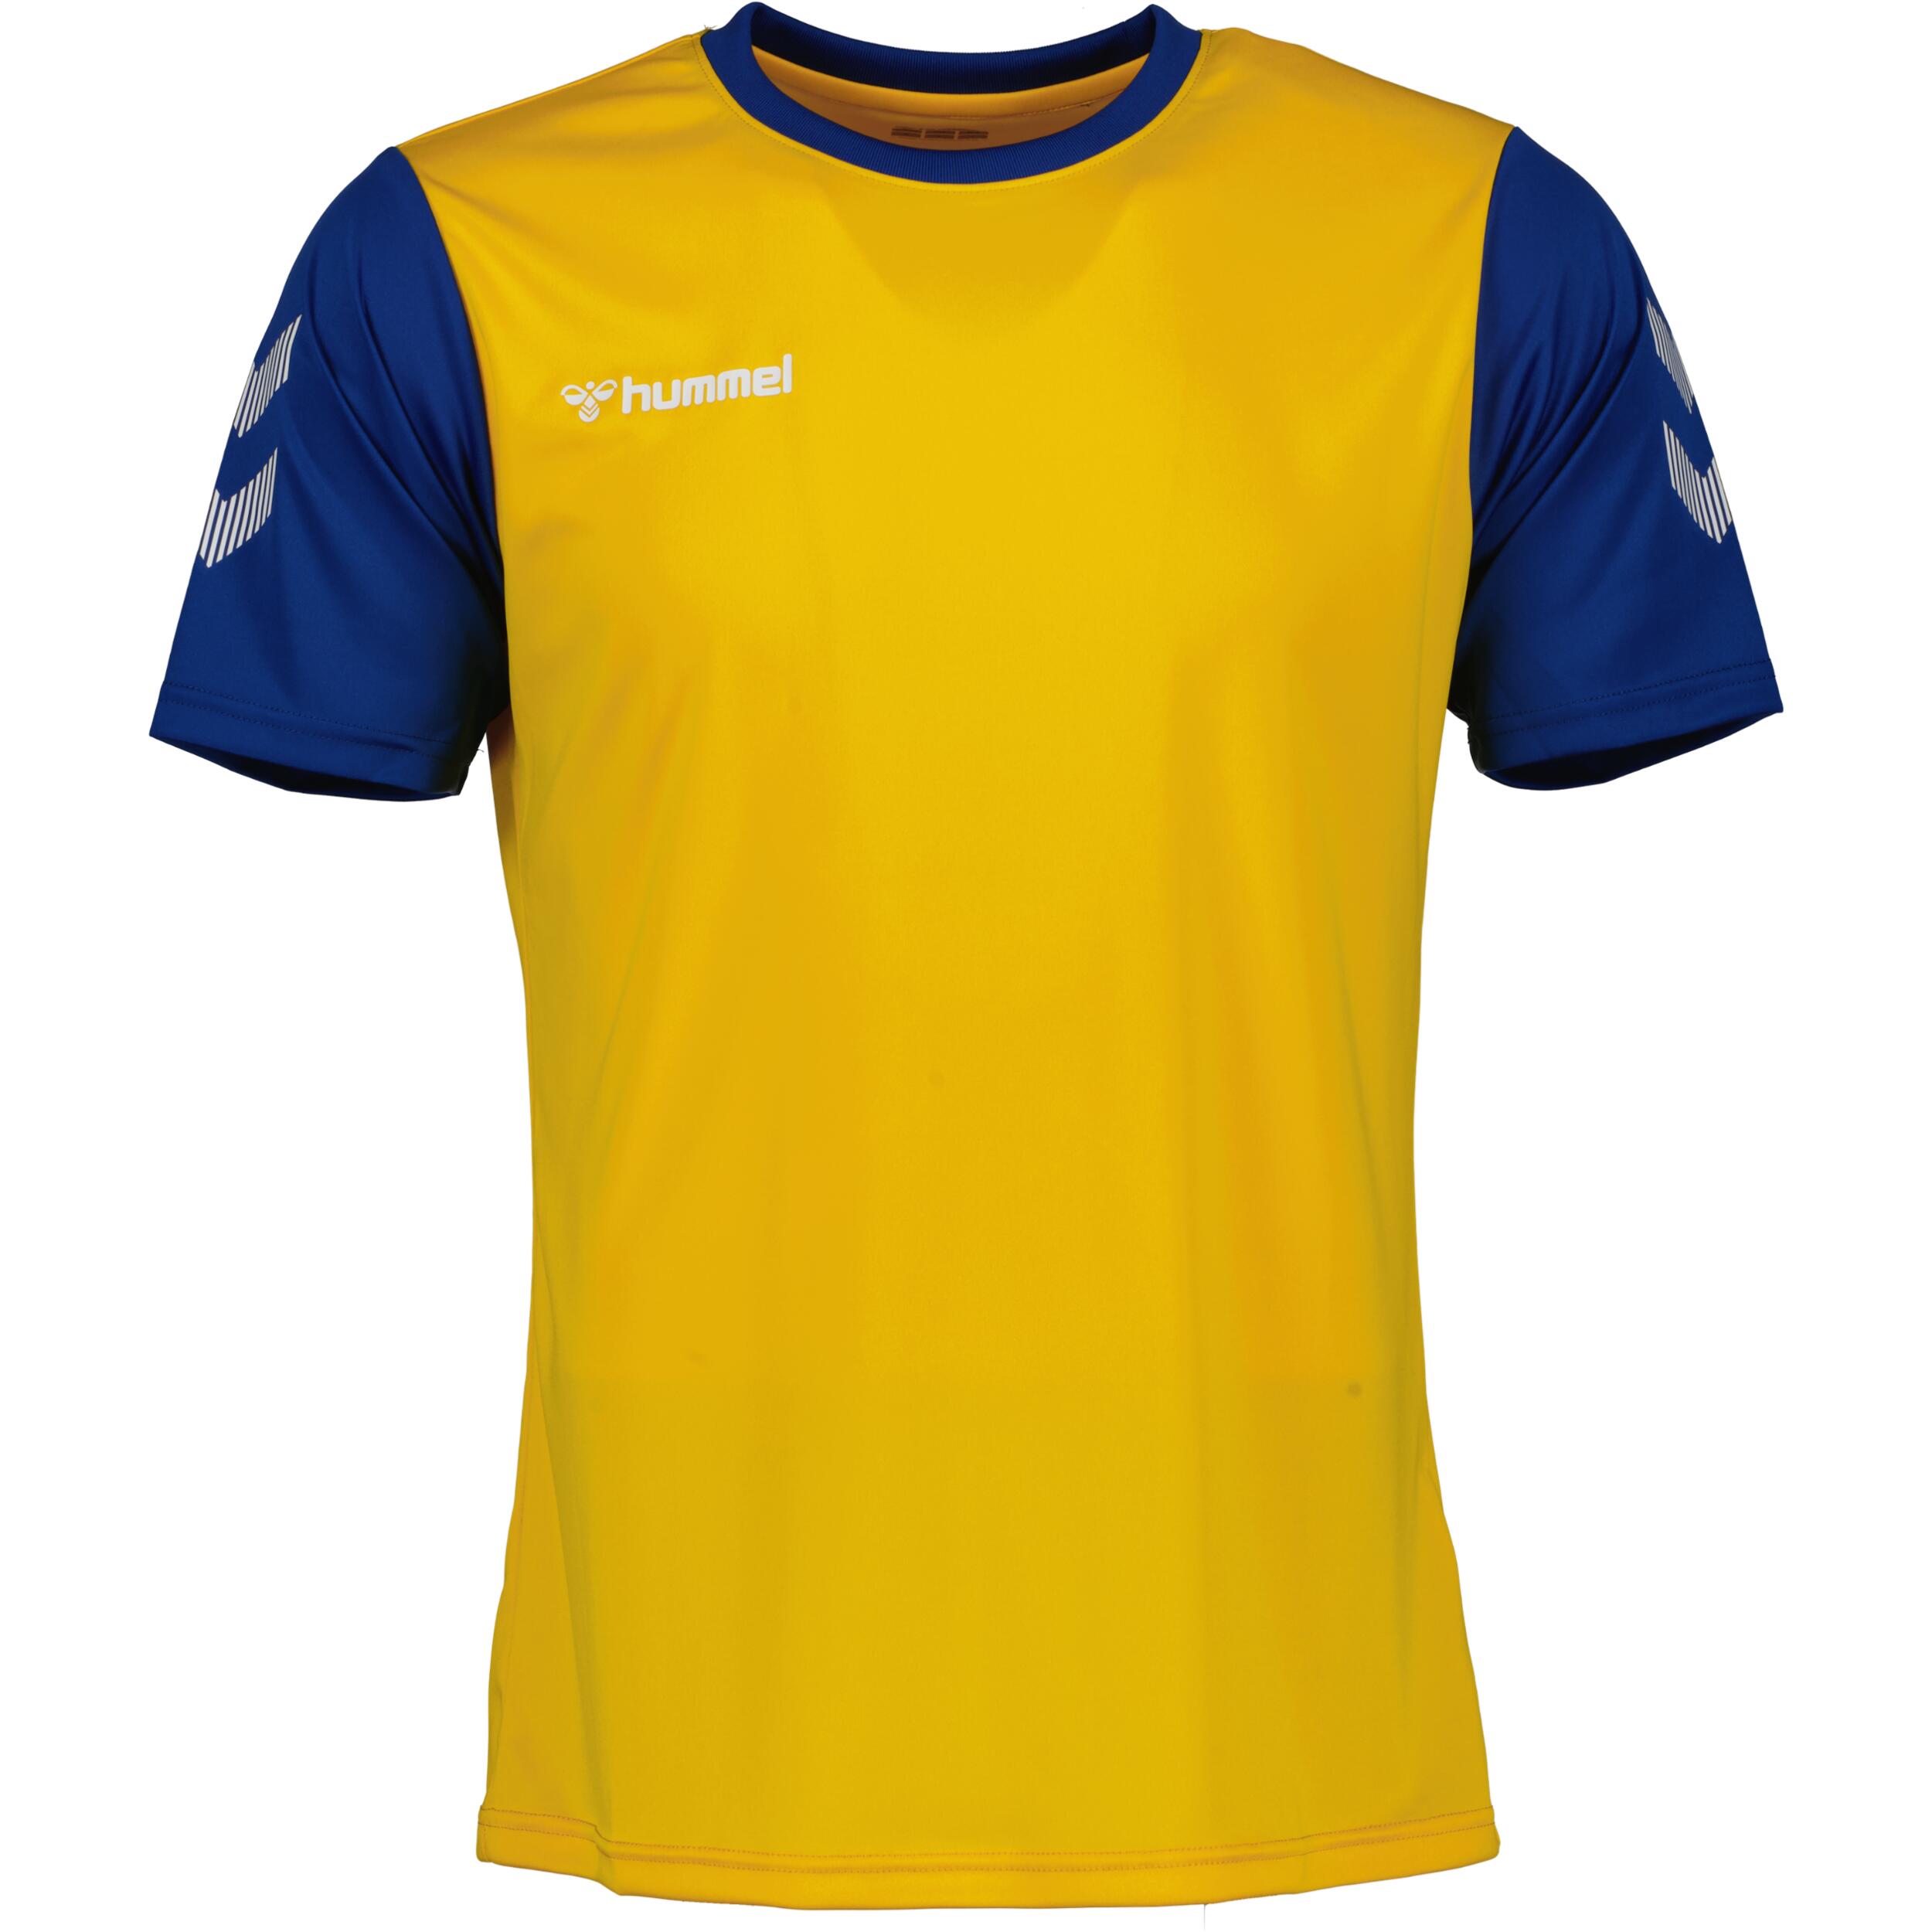 Match jersey for men, great for football, in yellow/blue 1/3